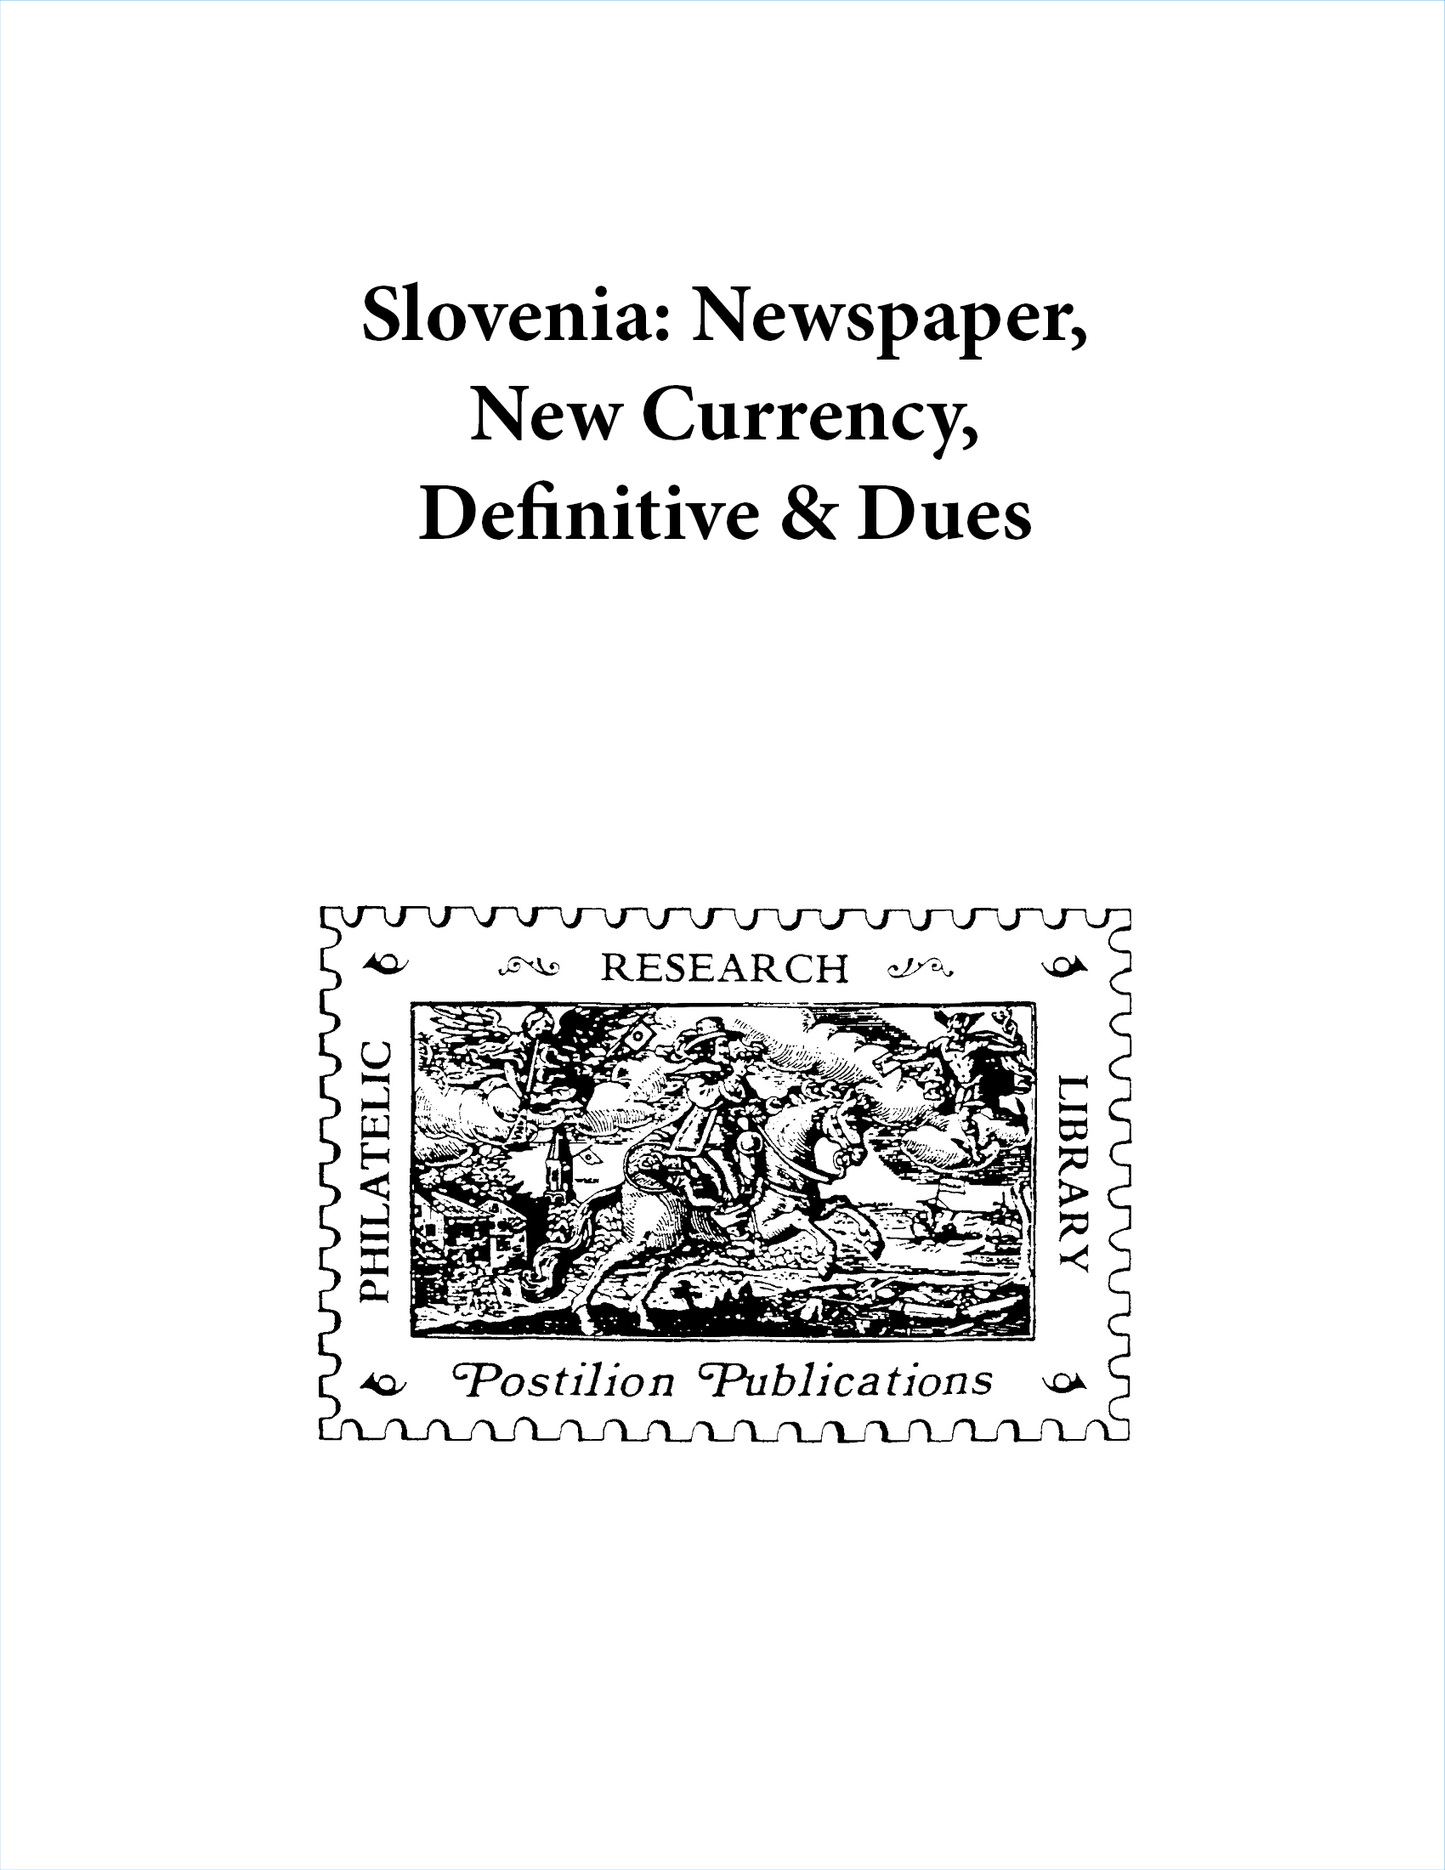 Postilion Slovenia: Newspaper, New Currency, Definitive & Dues Vol 2